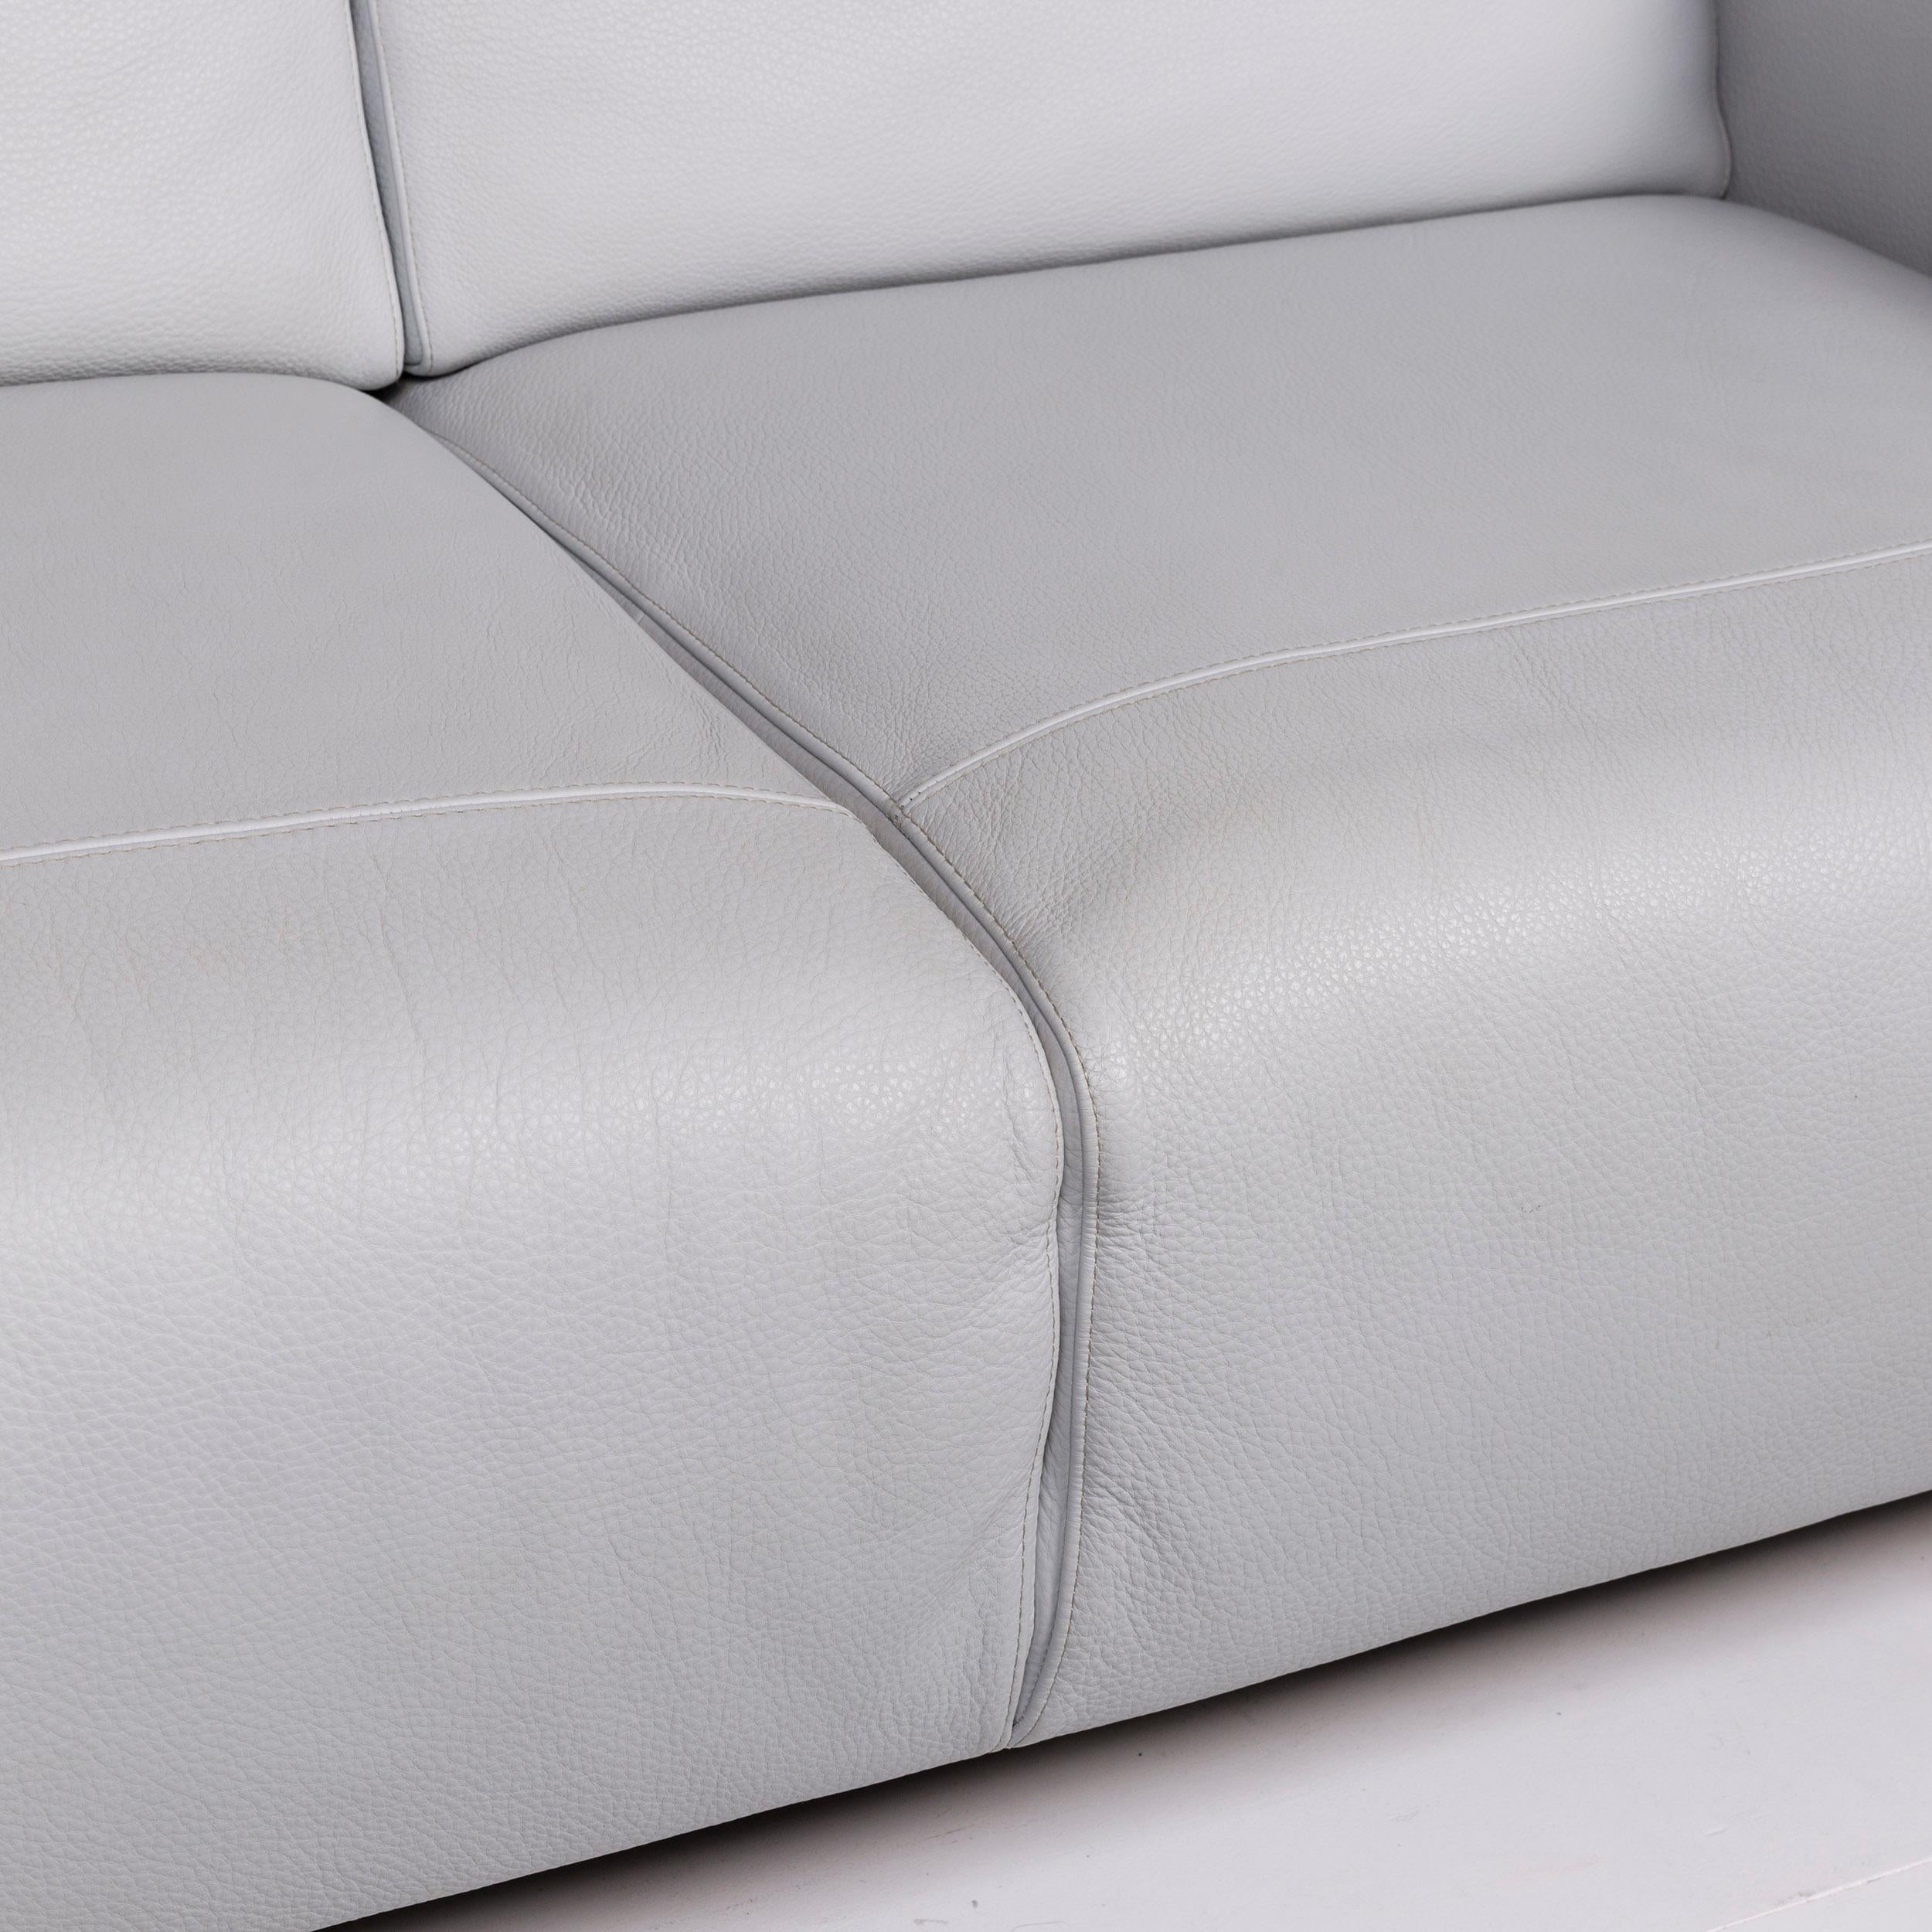 We bring to you a Natuzzi leather sofa ice blue gray blue two-seat couch.

 
Product measurements in centimeters:
 

Depth 96
Width 171
Height 79
Seat-height 43
Rest-height 64
Seat-depth 55
Seat-width 120
Back-height 35.
 